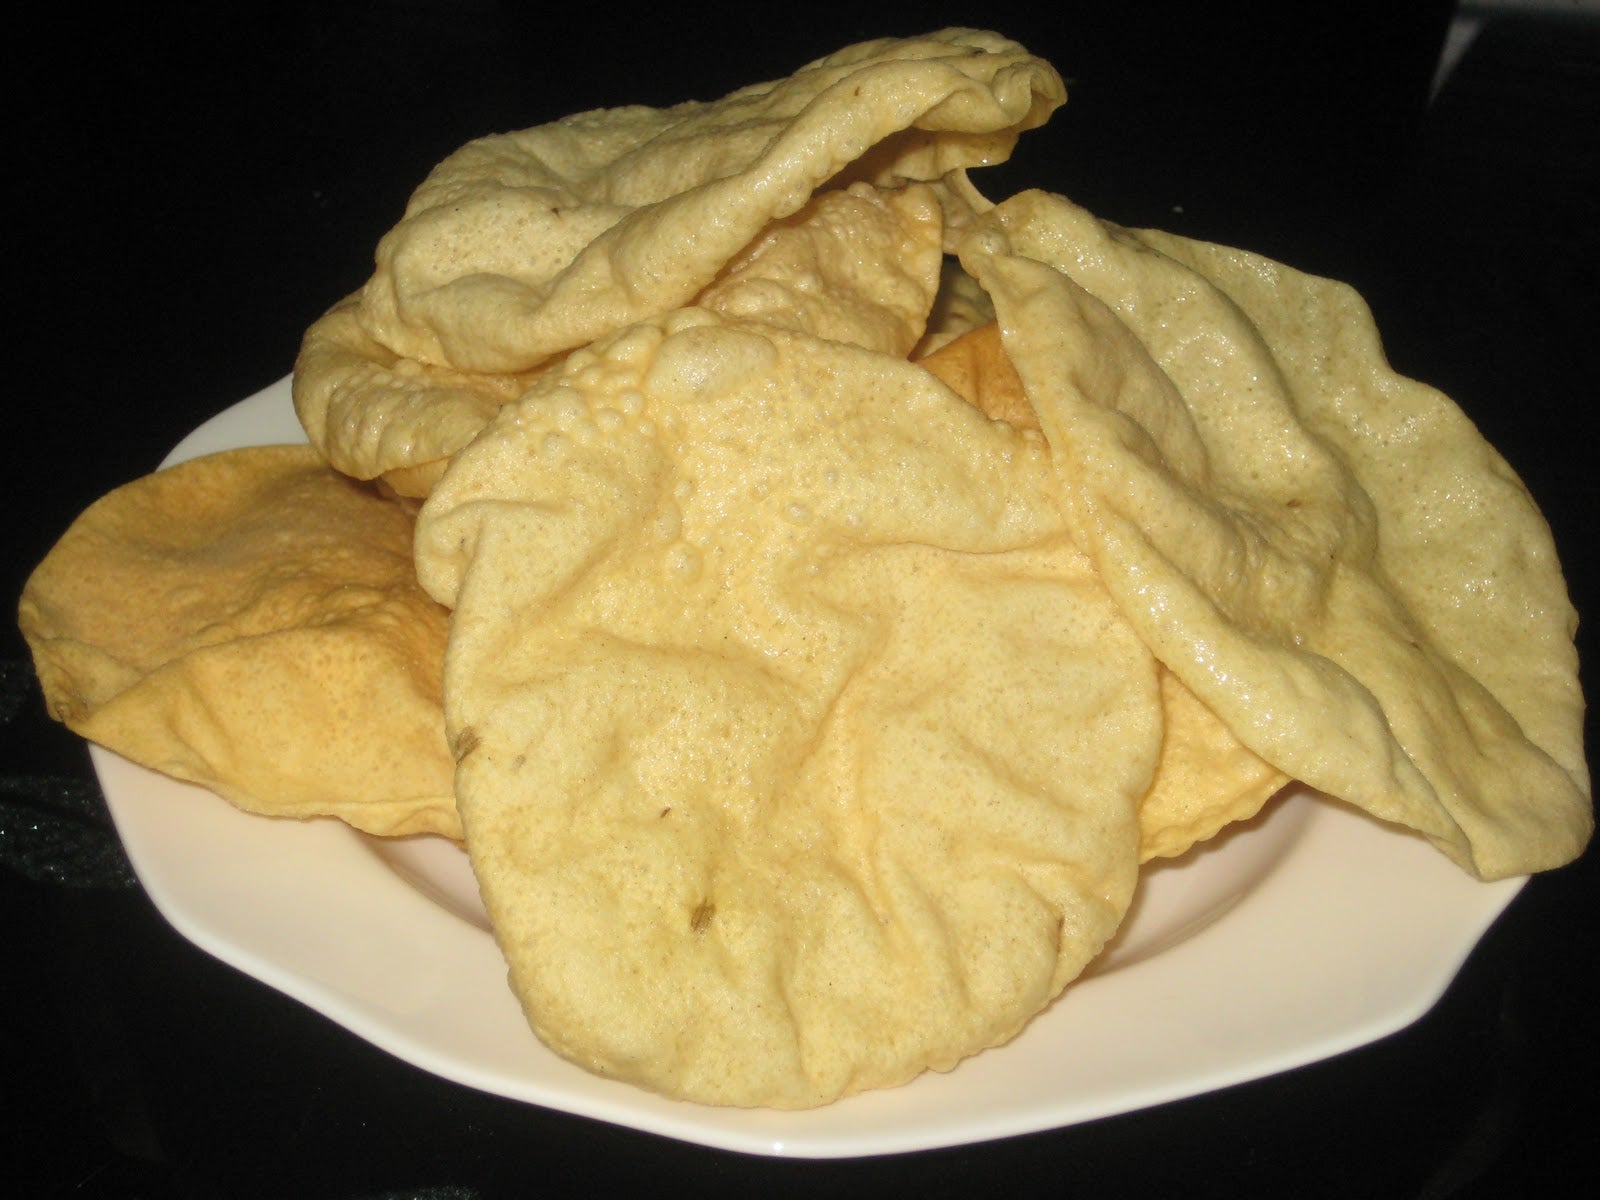 M'sians Advised Not to Overeat Papadom As It Contains Excessive Amount of Sodium - WORLD OF BUZZ 3